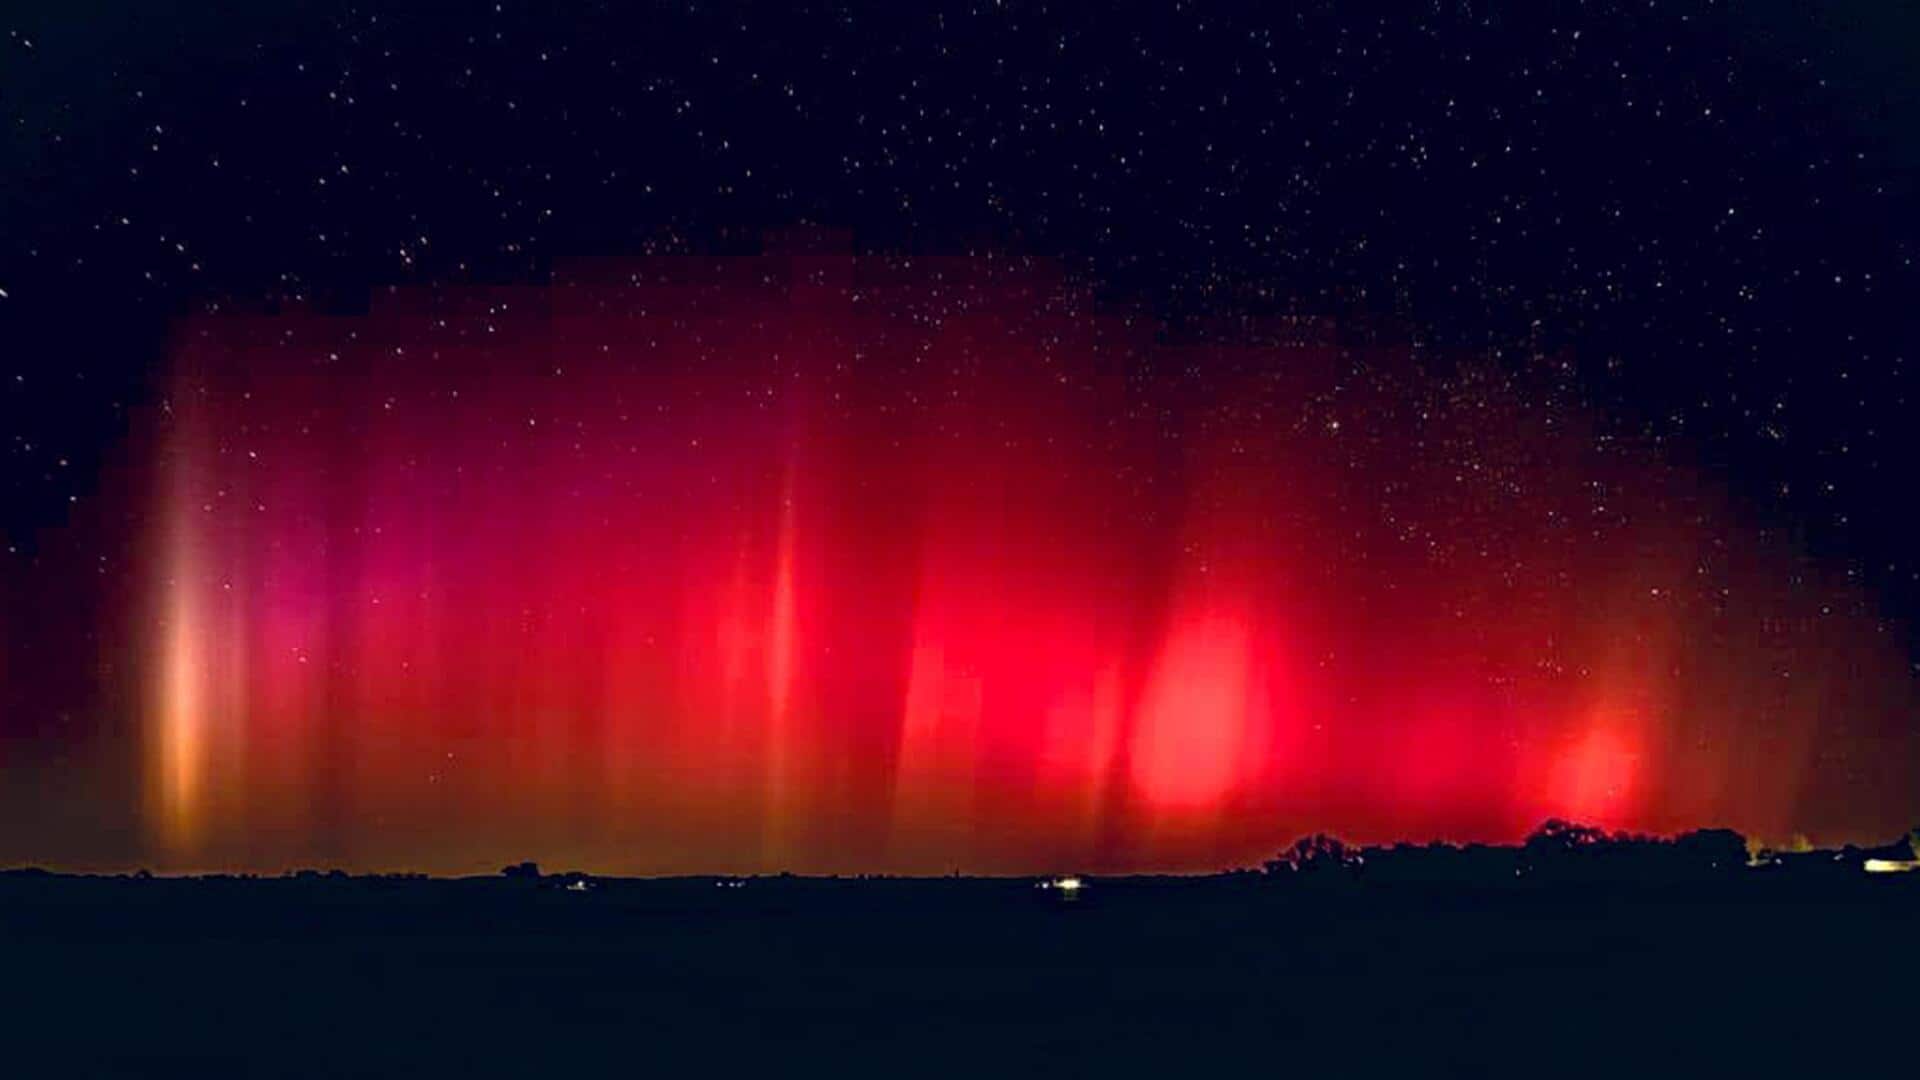 Bulgaria experiences first aurora, sky turns red (not green)